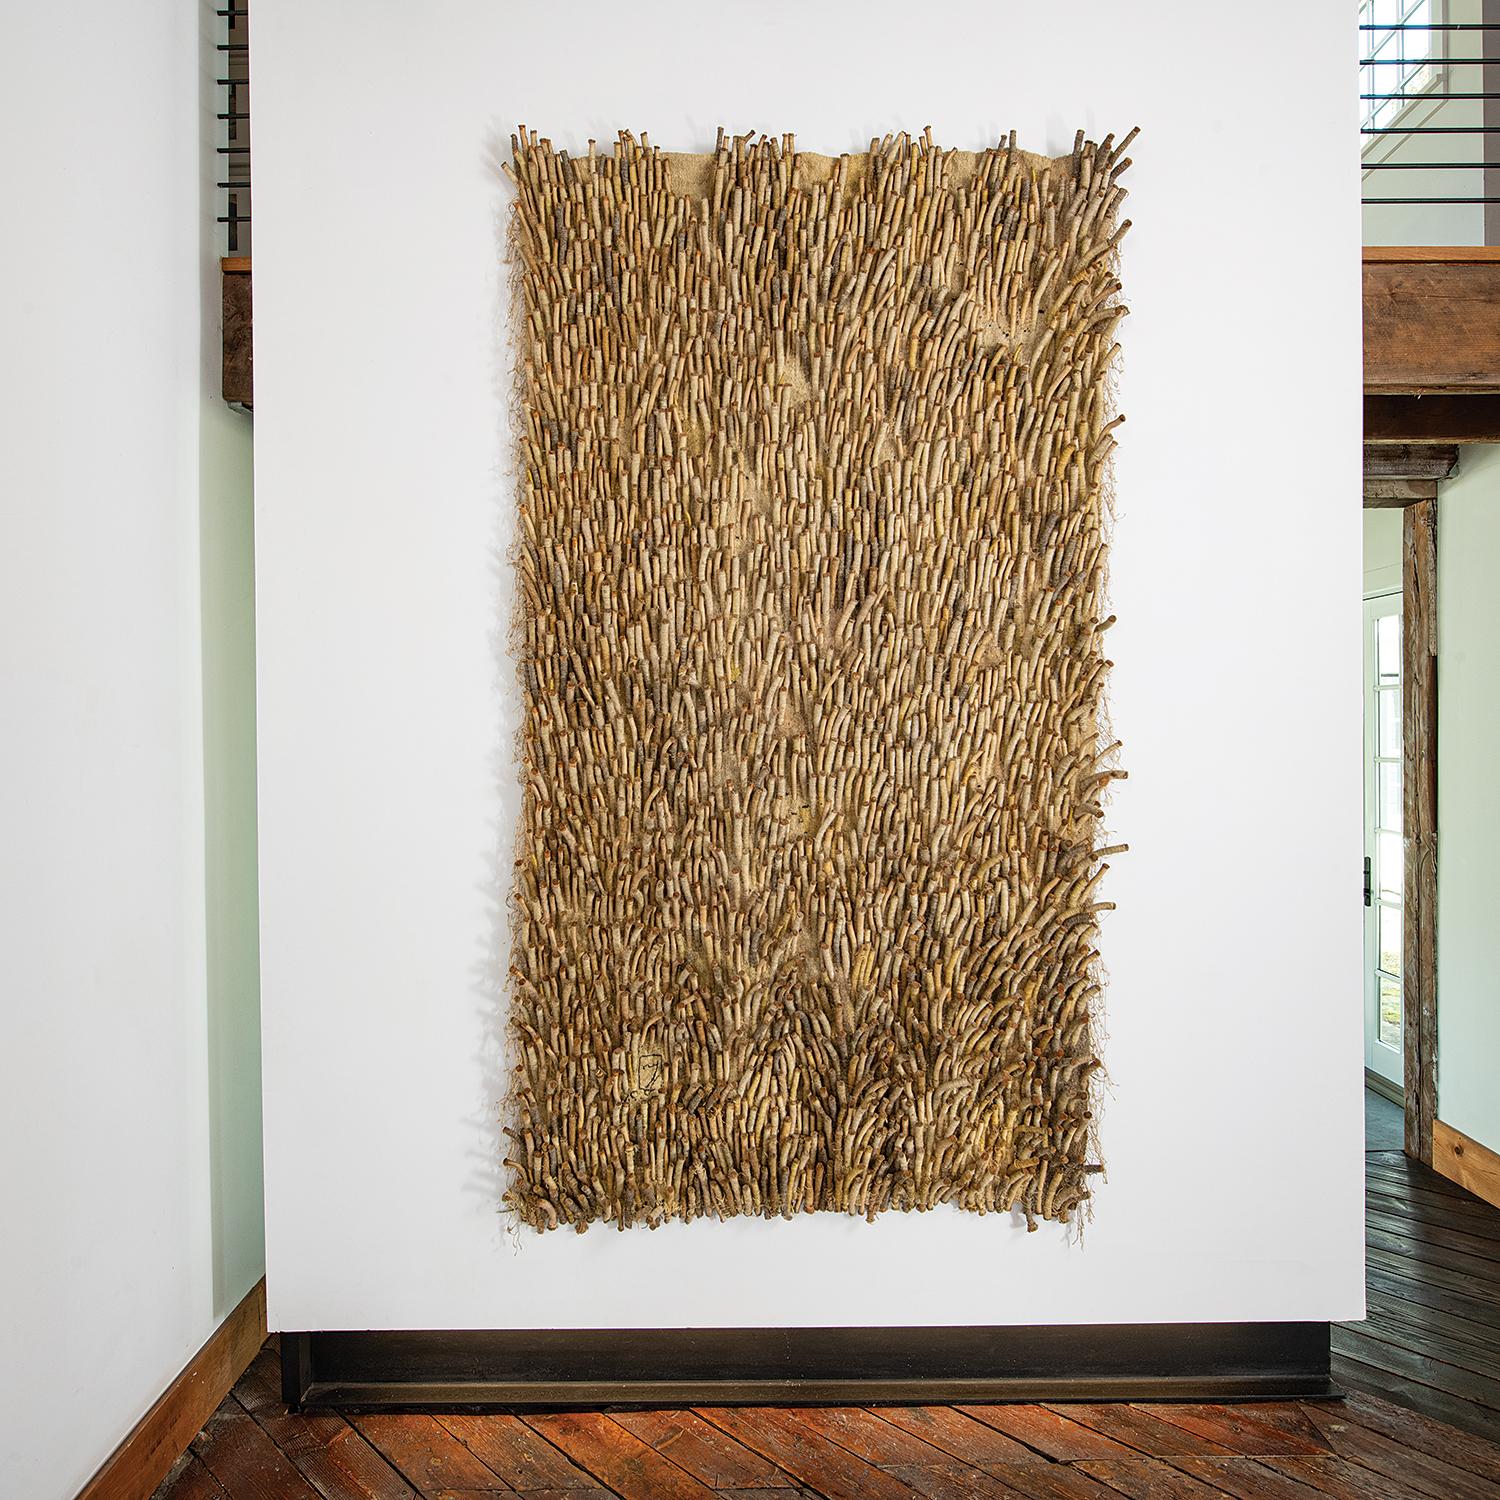 Exotica Series, Abstract Woven Tapestry, Textile Sculpture